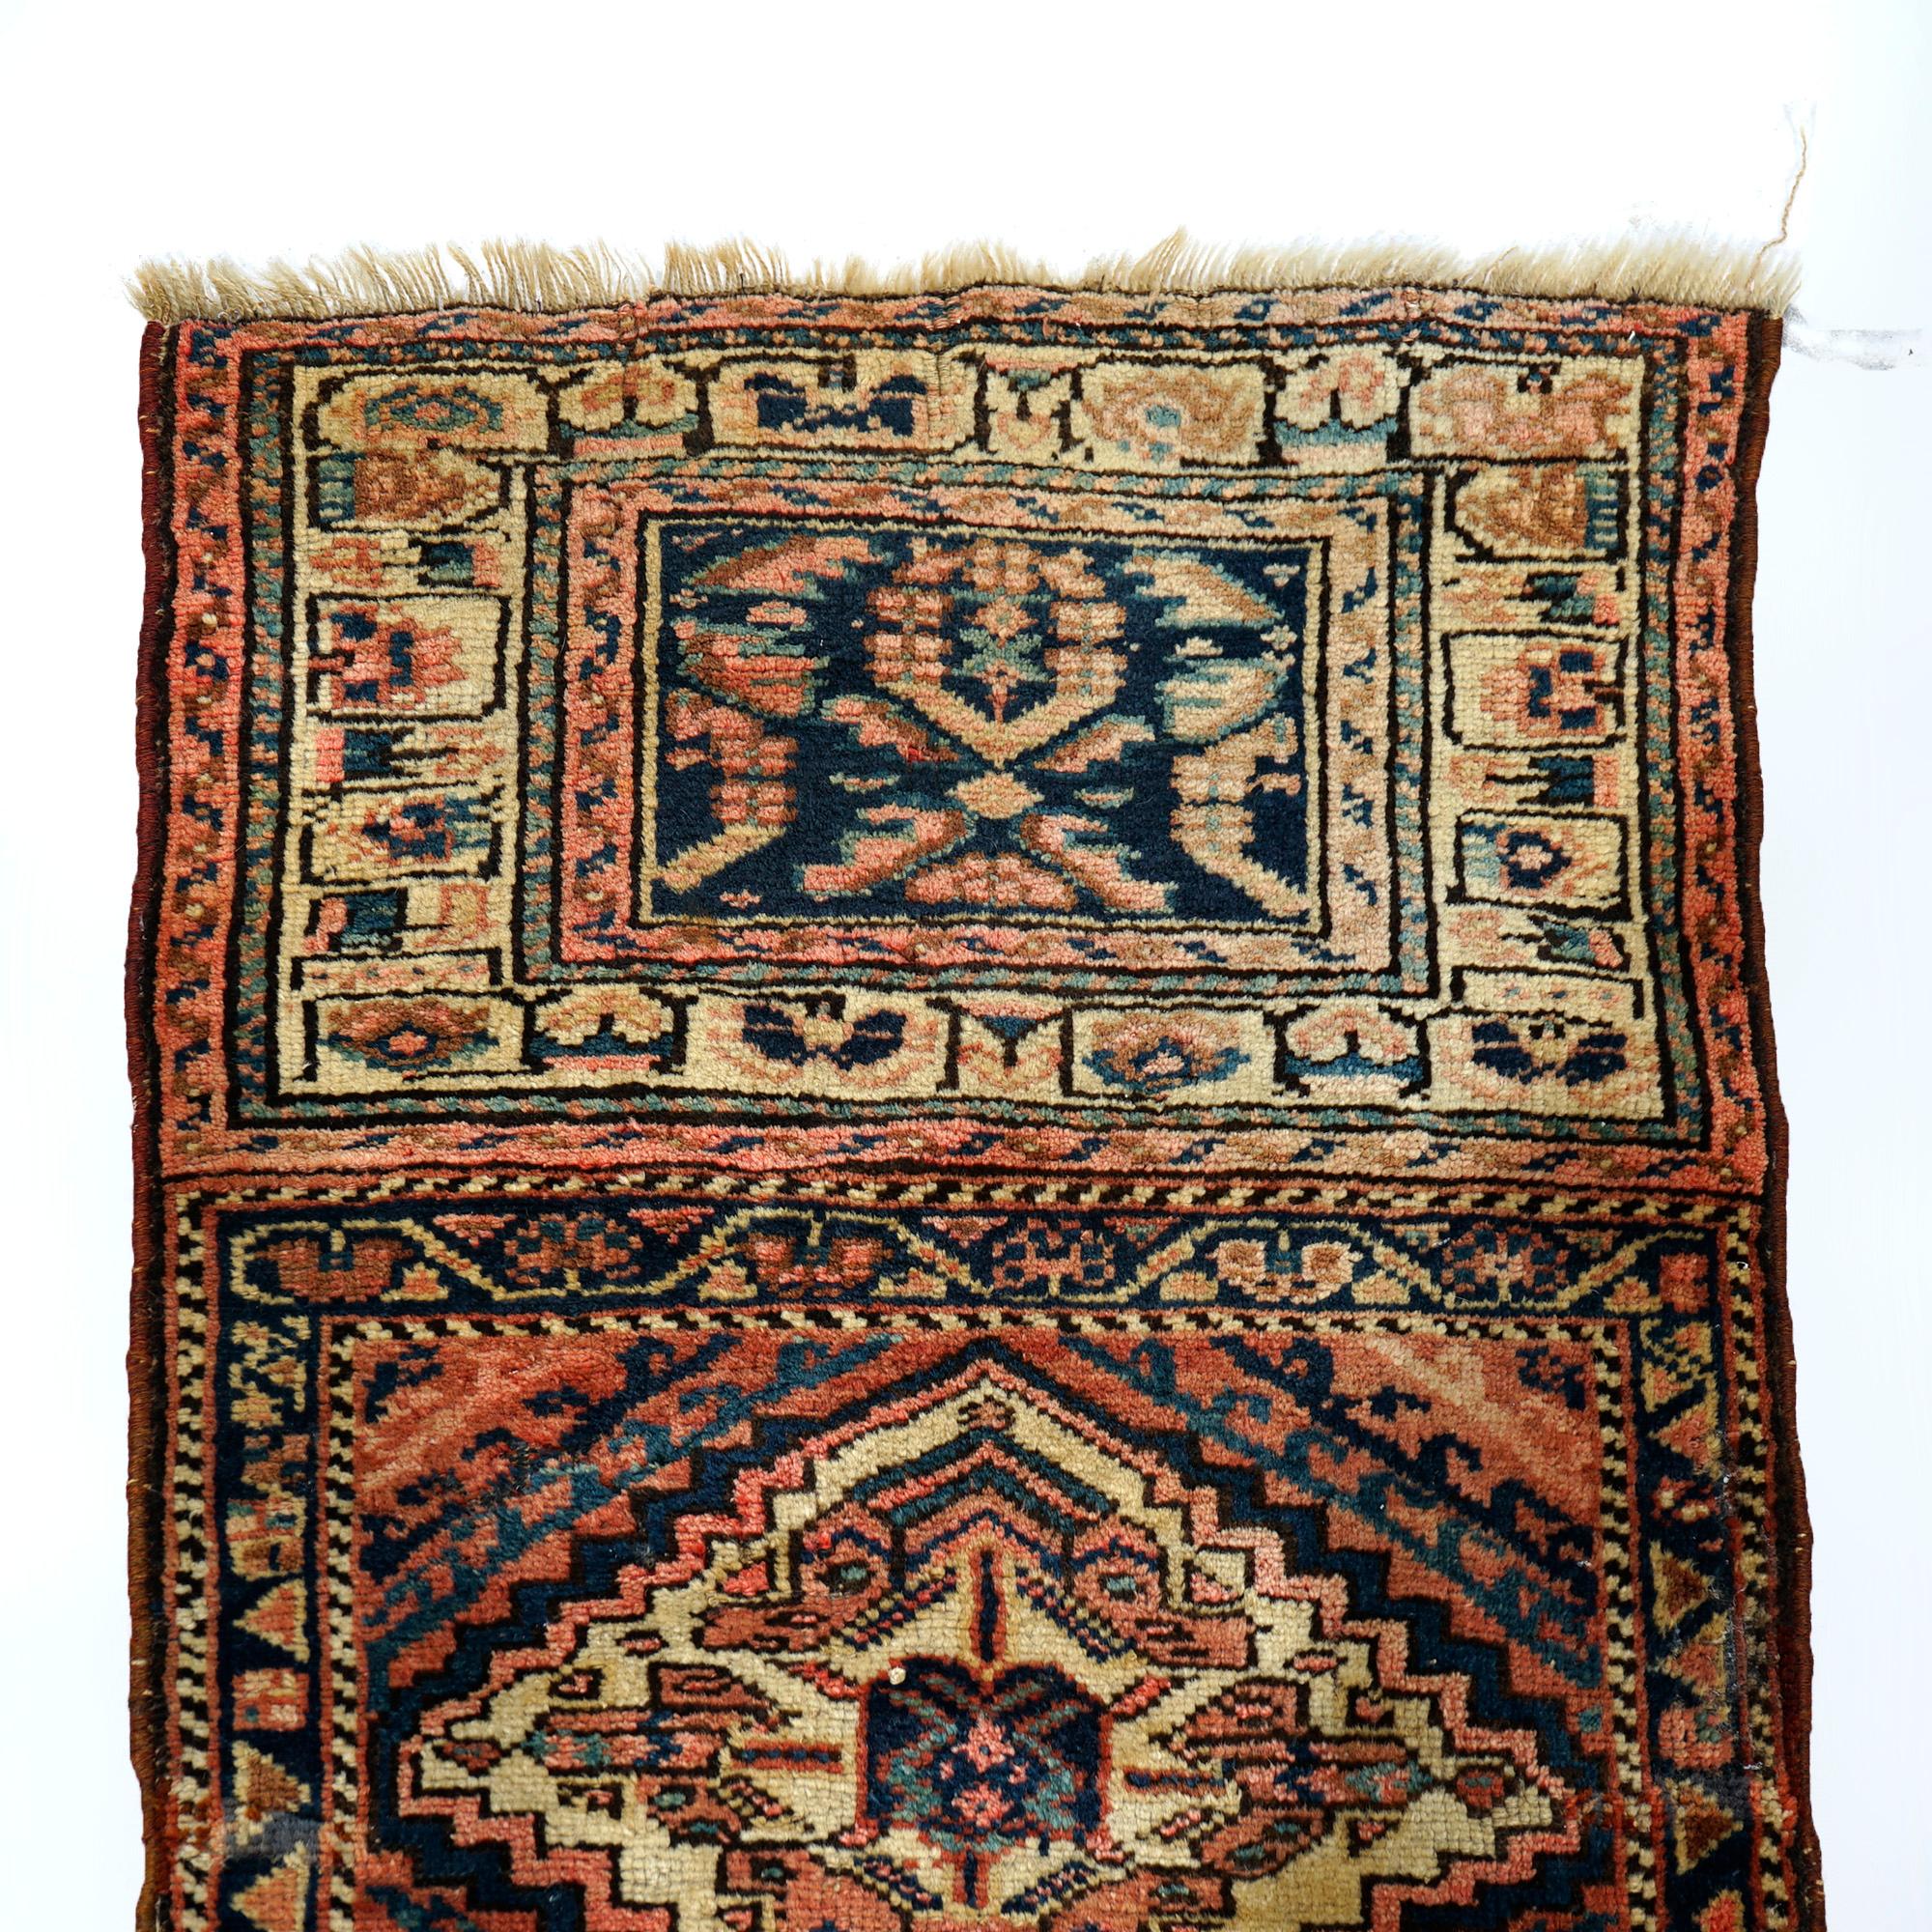 An antique Kurdish tribal sampler mat offers wool construction with two panels, each having geometric design, c1920

Measures- 33.5'' x 24.5'' 

Catalogue Note: Ask about DISCOUNTED DELIVERY RATES available to most regions within 1,500 miles of New